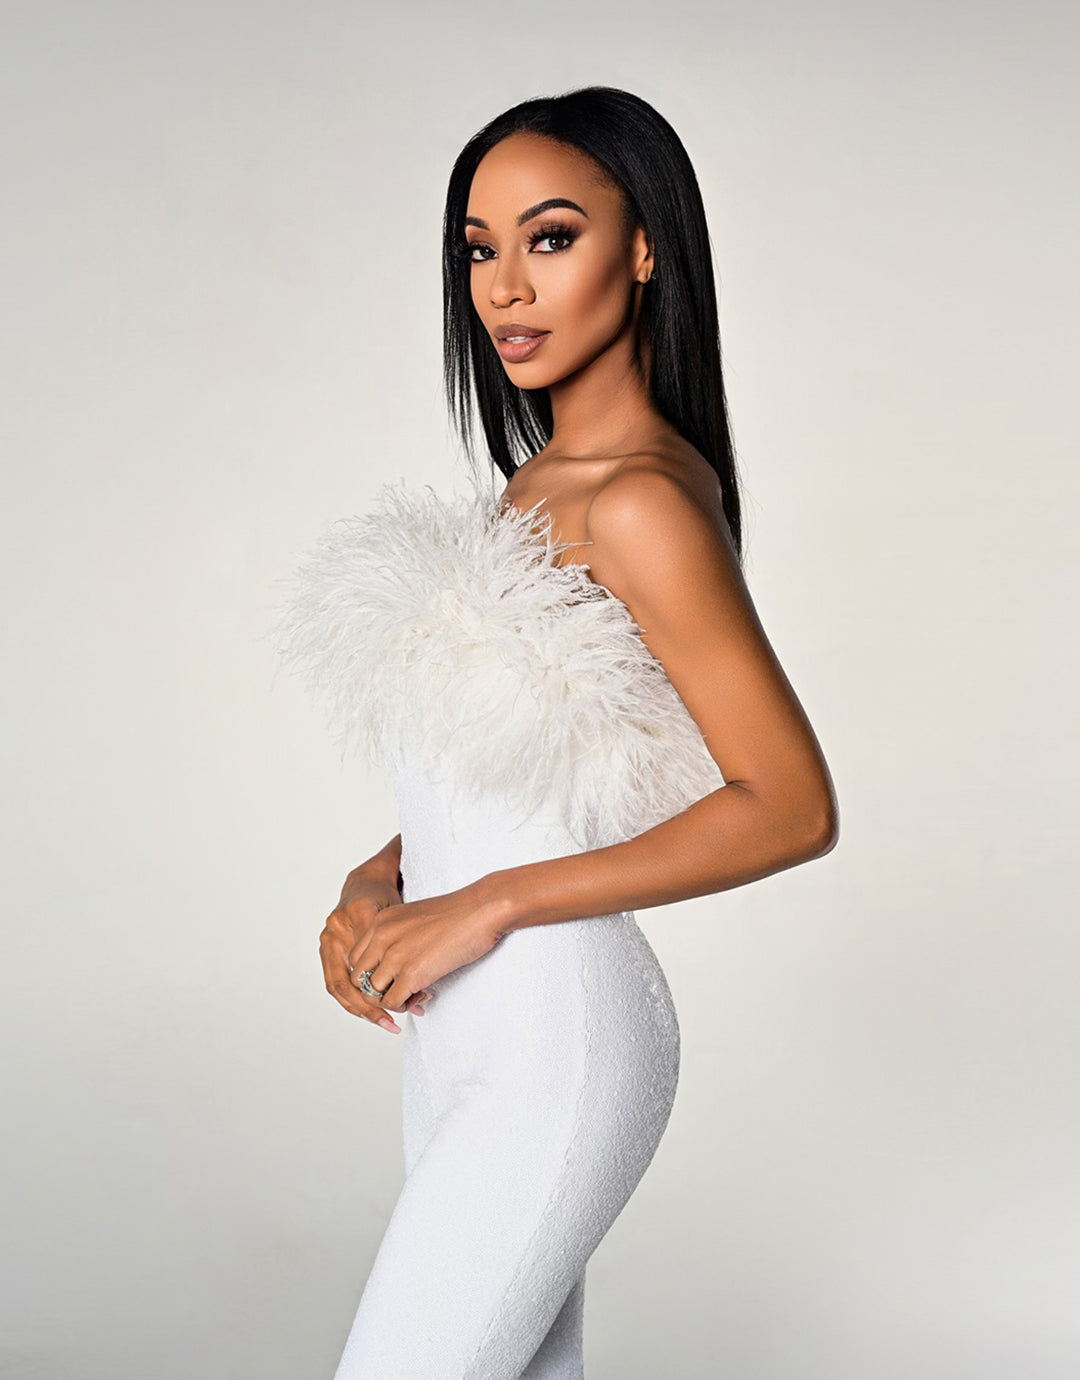 Maia White Strapless Jumpsuit with Ostrich Feathers | Debbie Carroll Designs - Debbie Carroll